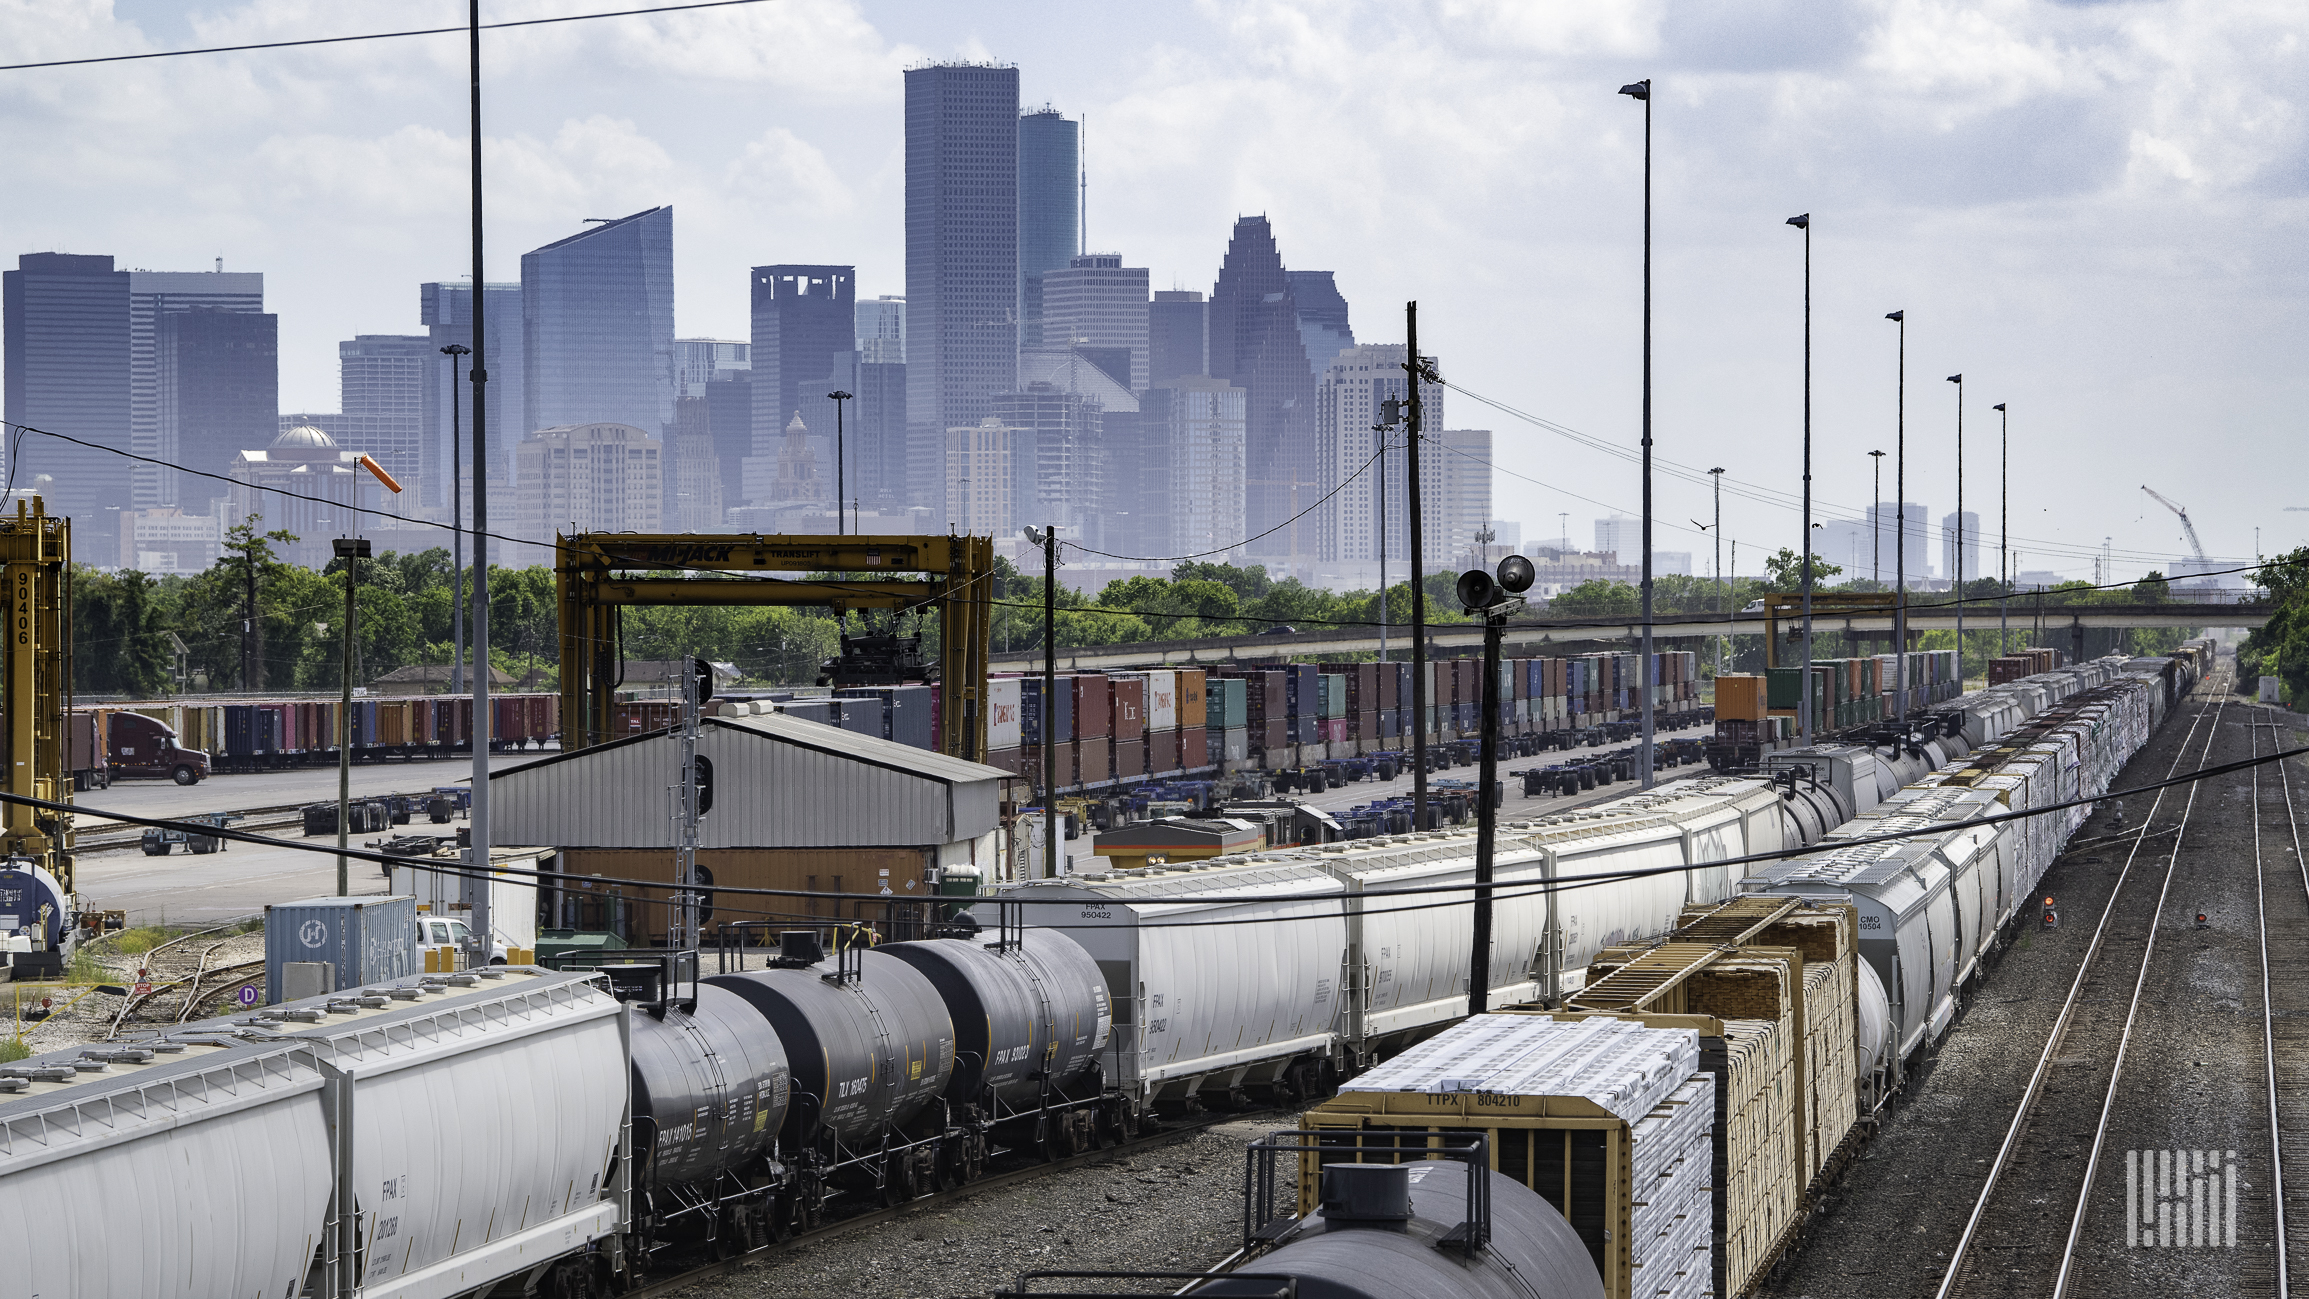 A photograph of railcars parked in a rail yard. There is a city skyline in the distance.